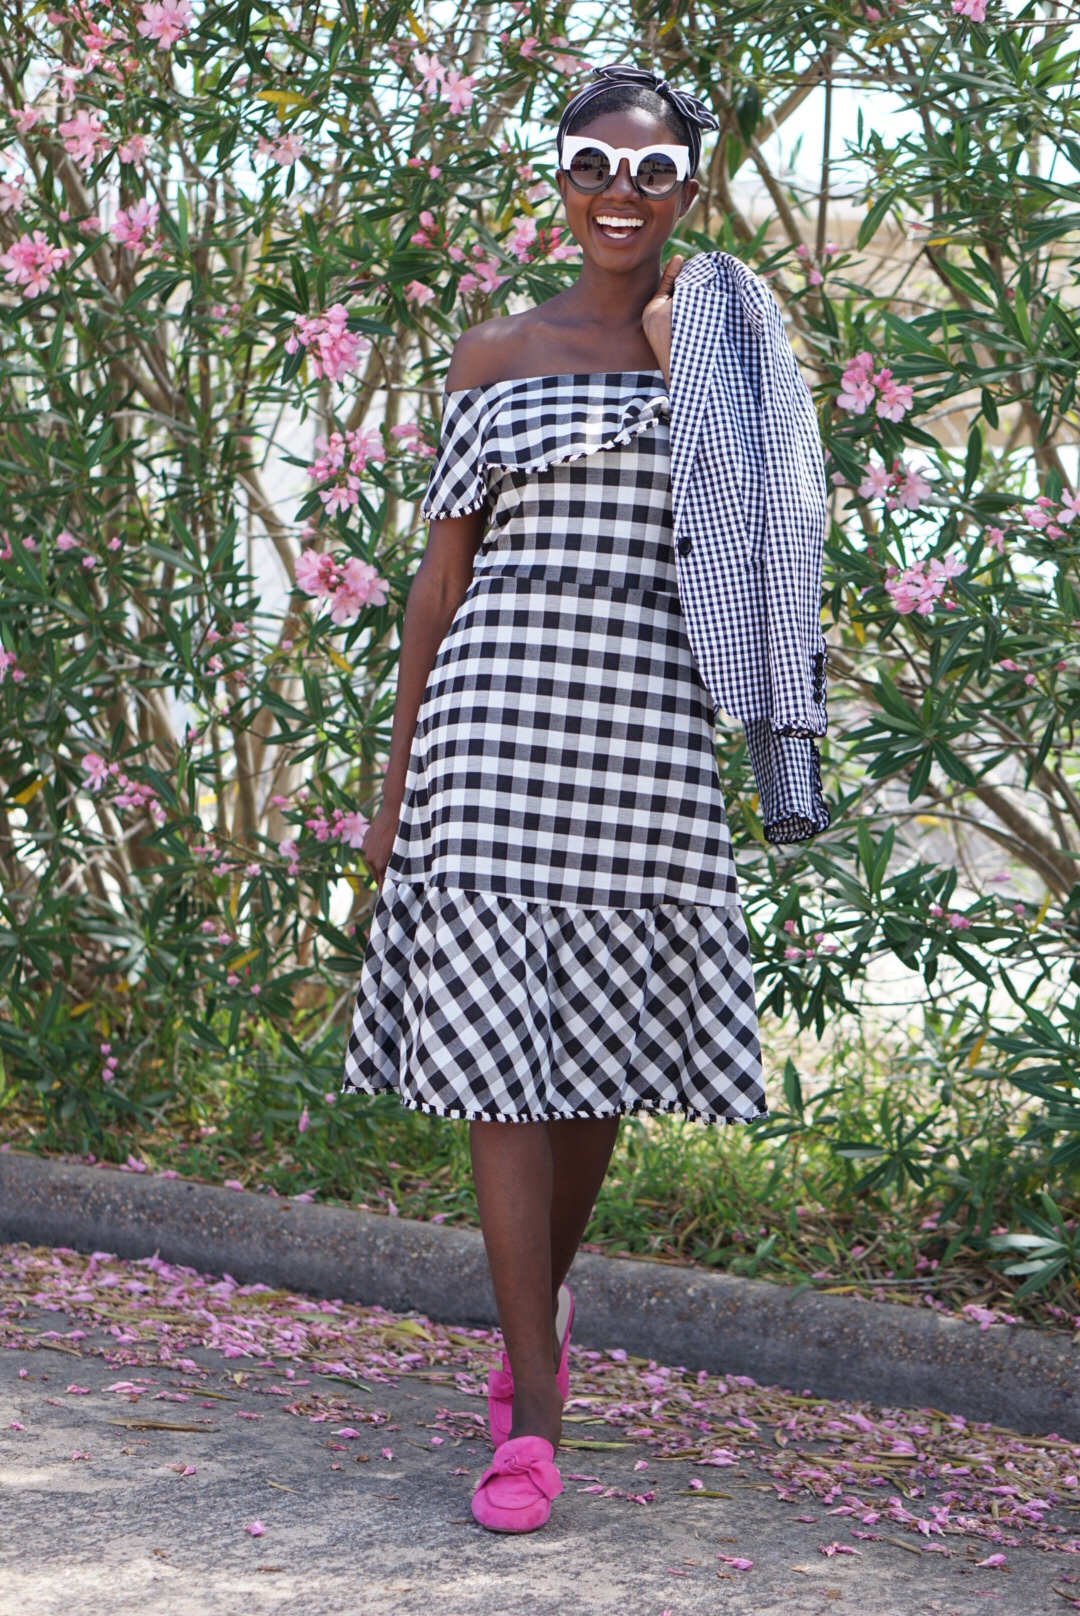 twa, short natural hair styles, 4b hair, 4c hair, nude lip color for brown girls, gingham dress, ann taylor dress, off the shoulder dress, summer trends, beauty photography, floral beauty 